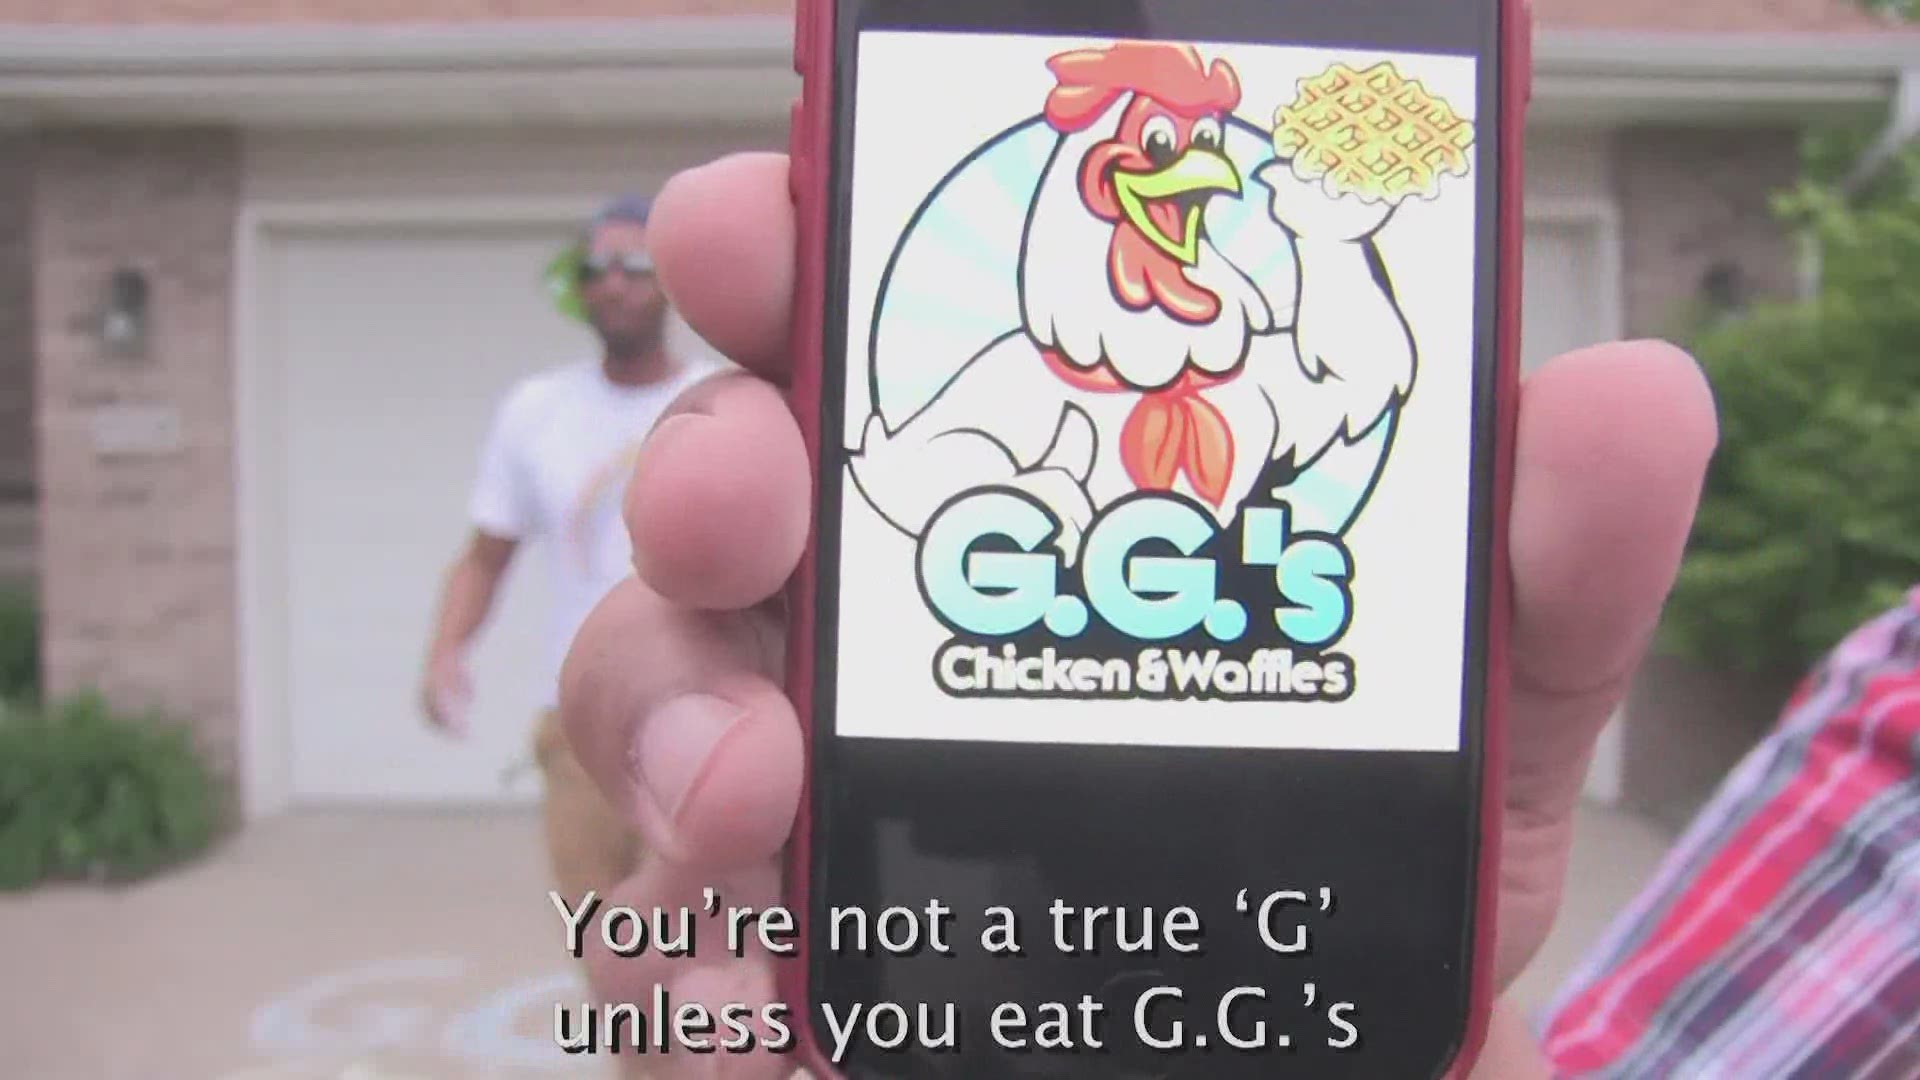 The owner of G.G.'s Chicken and Waffles says he's using his platform to promote other Black business owners in Iowa.